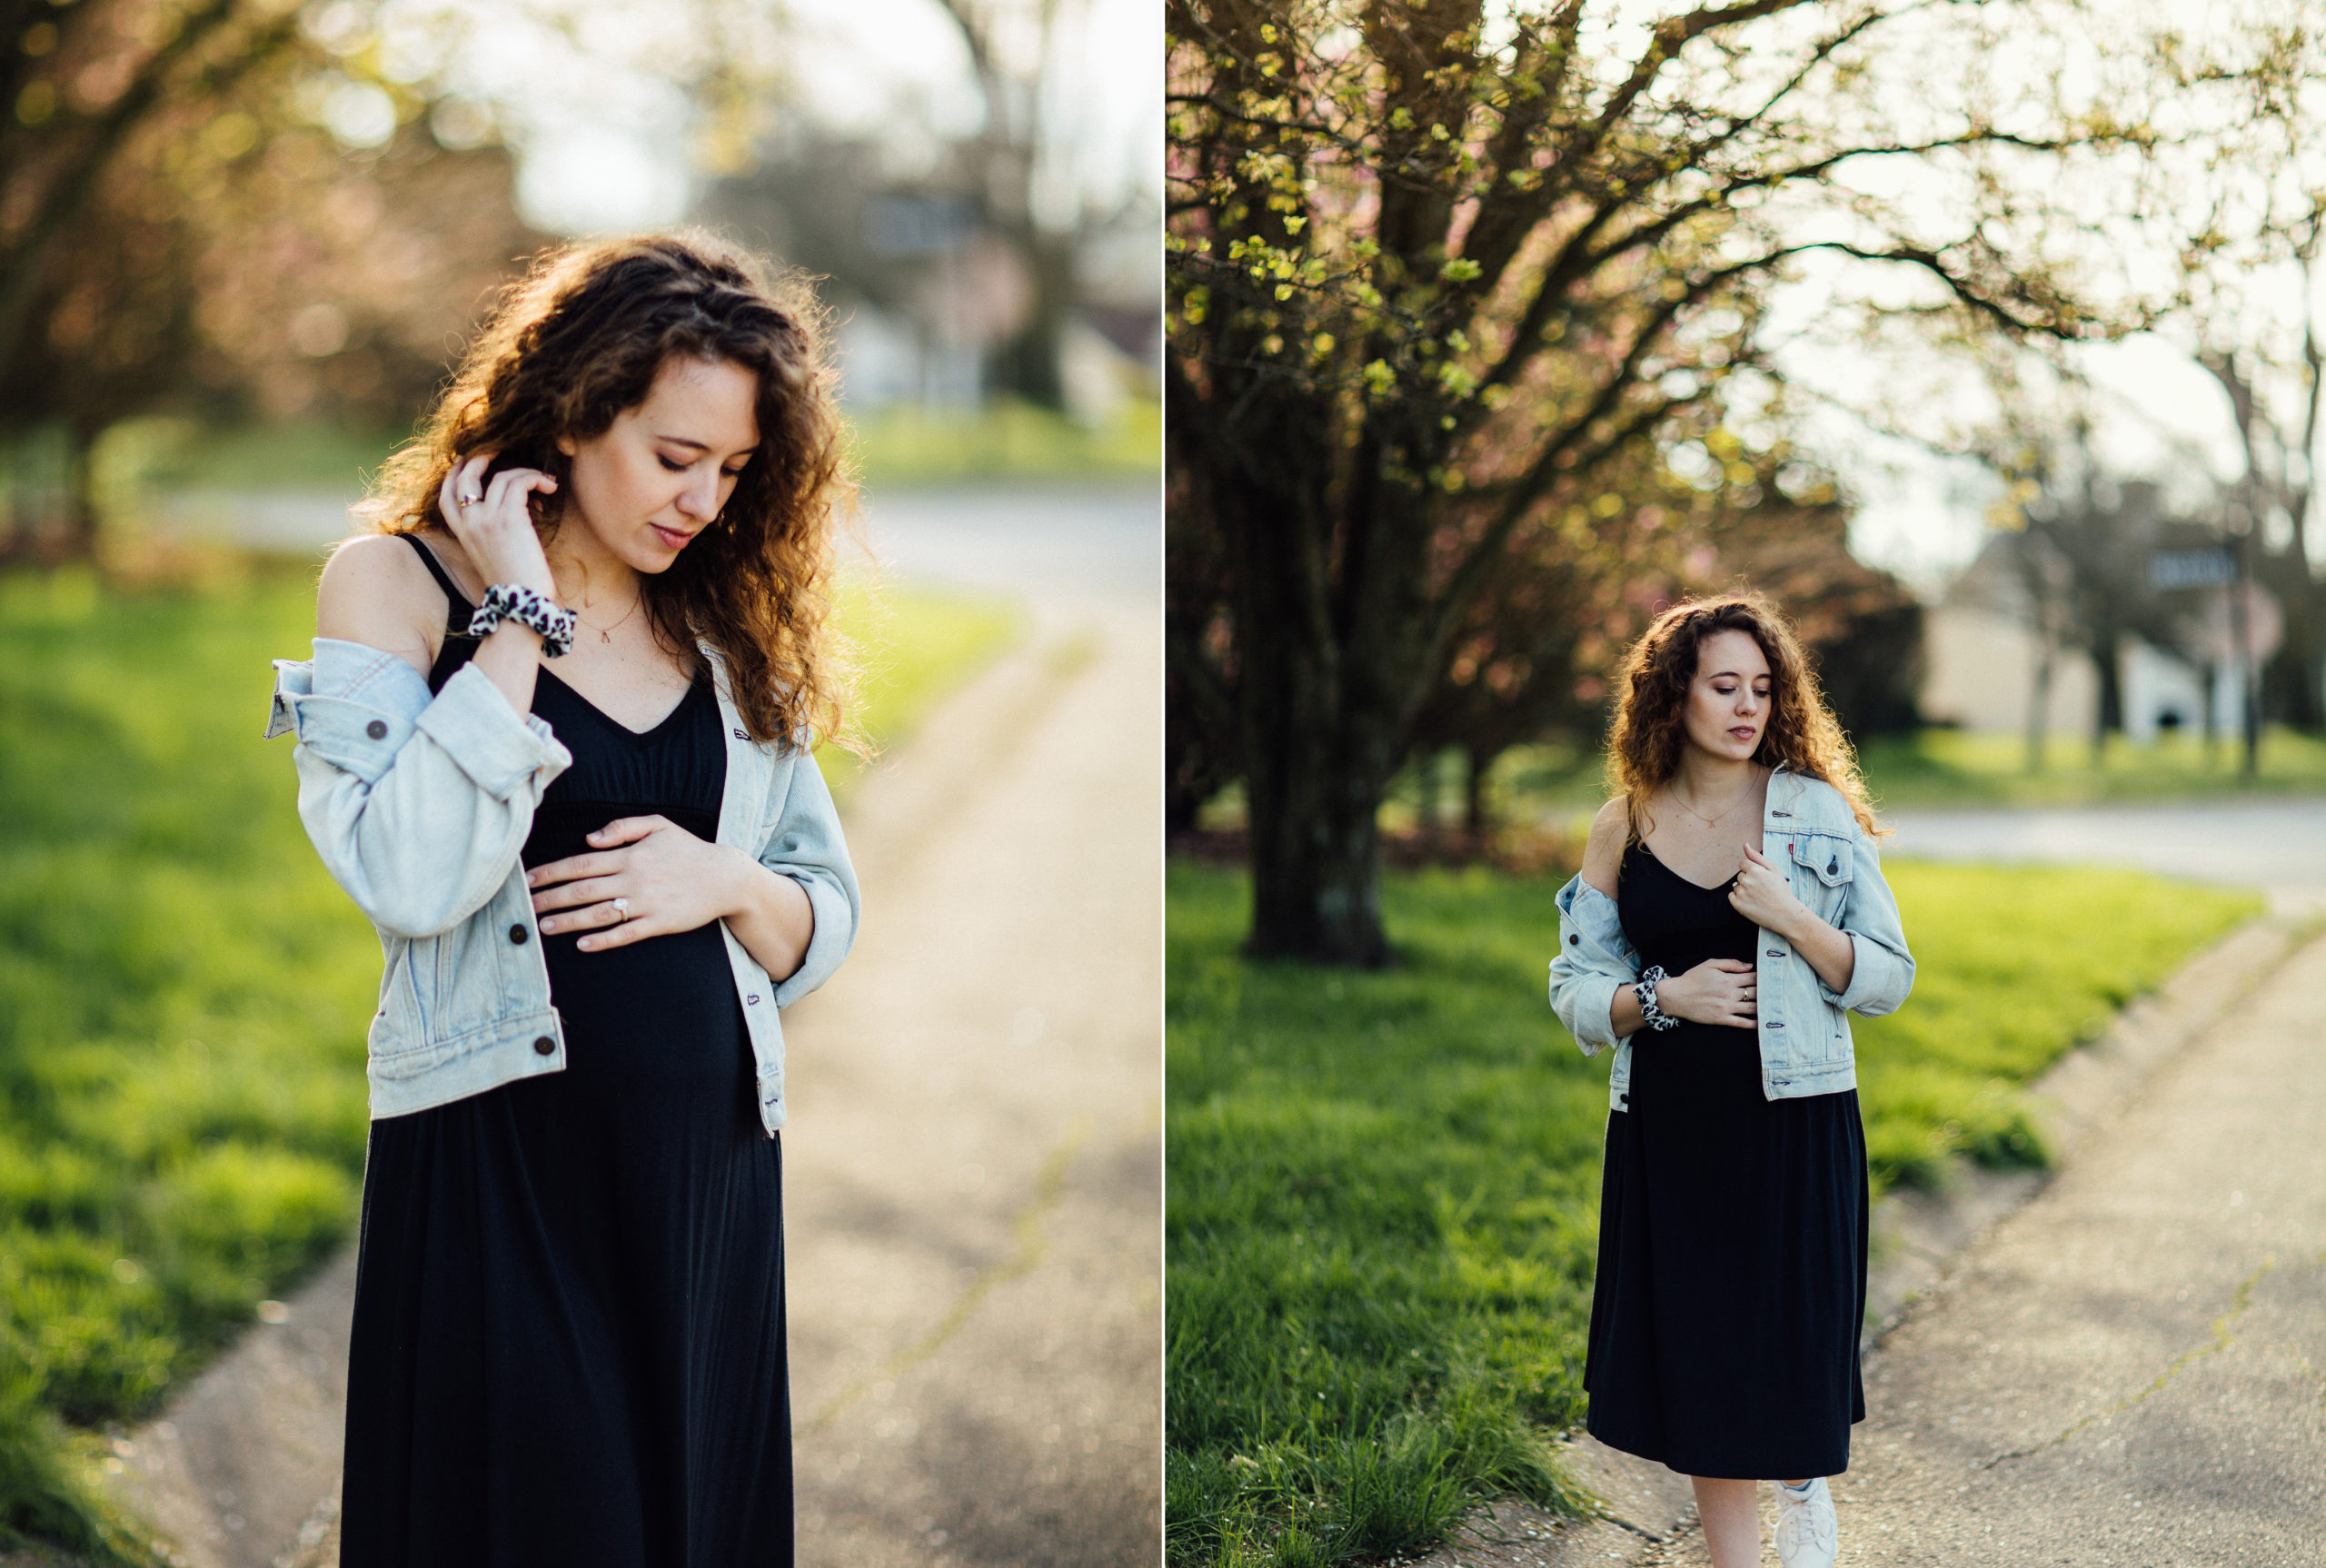 Maternity photography of woman walking down street in black dress looking at her growing belly in Franklin, Tennessee